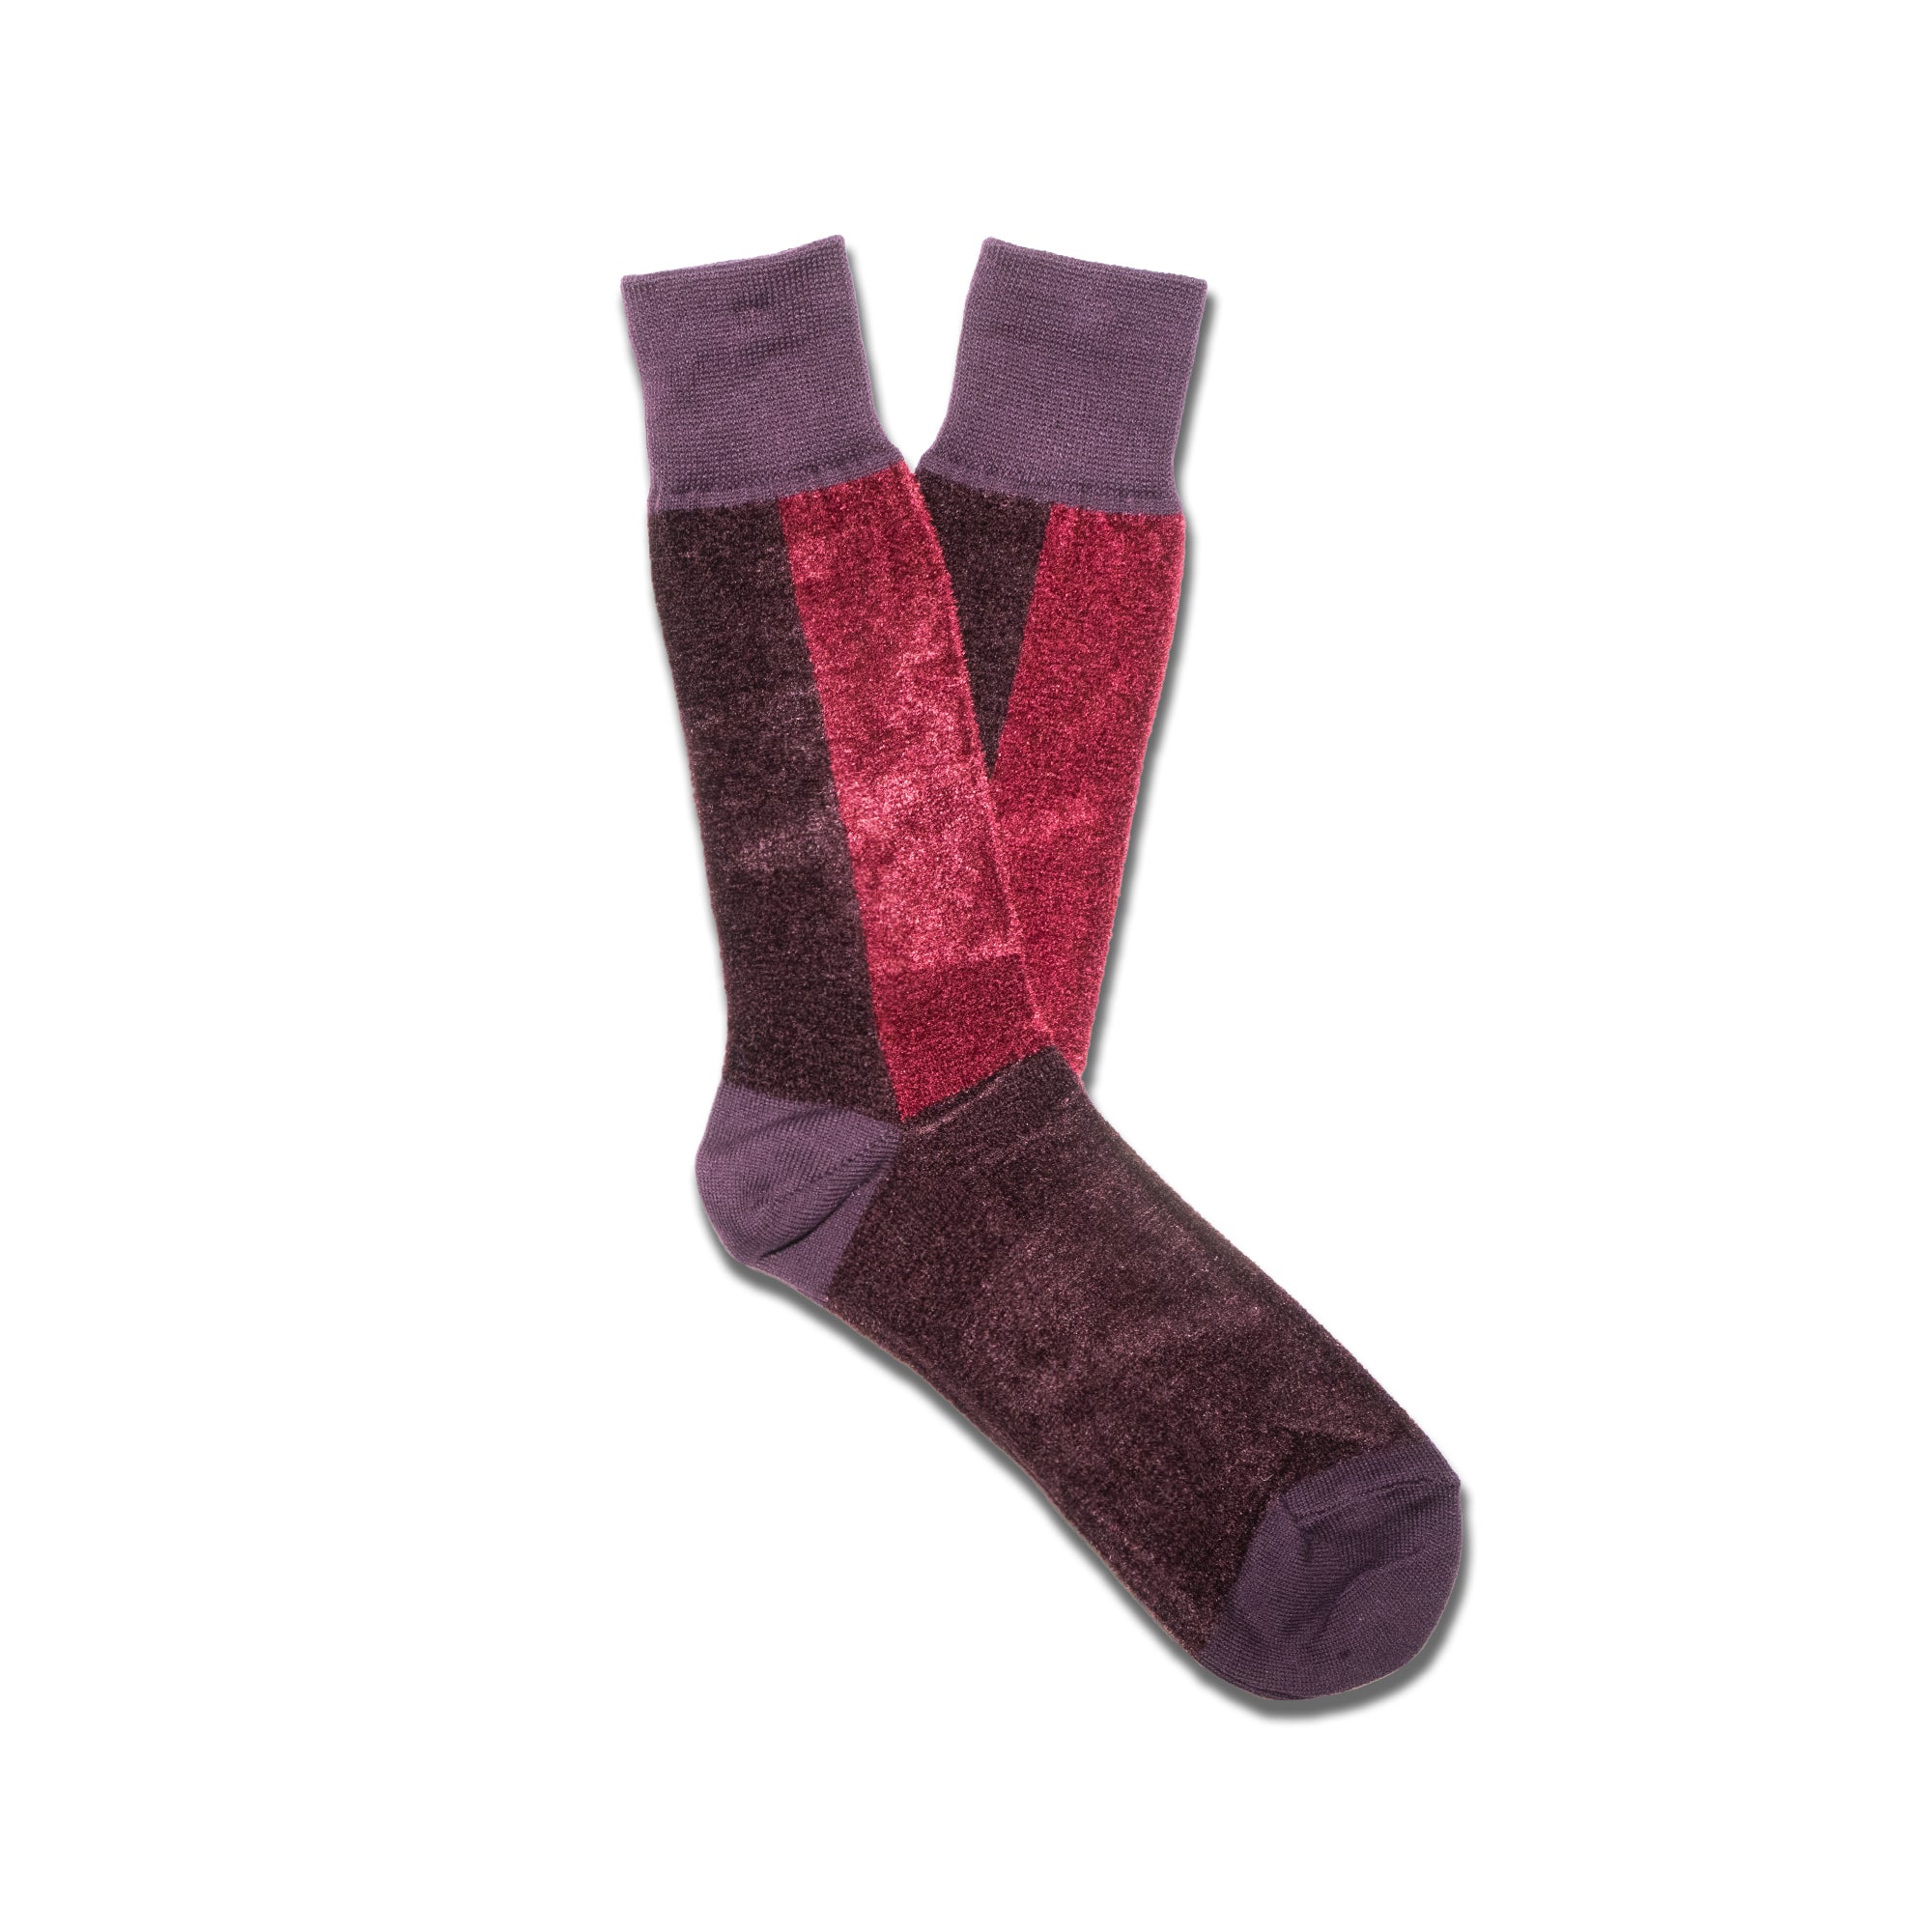 ANONYMOUS ISM - VELOUR PATCHWORK CREW SOCKS - WINE at Mannahatta NYC